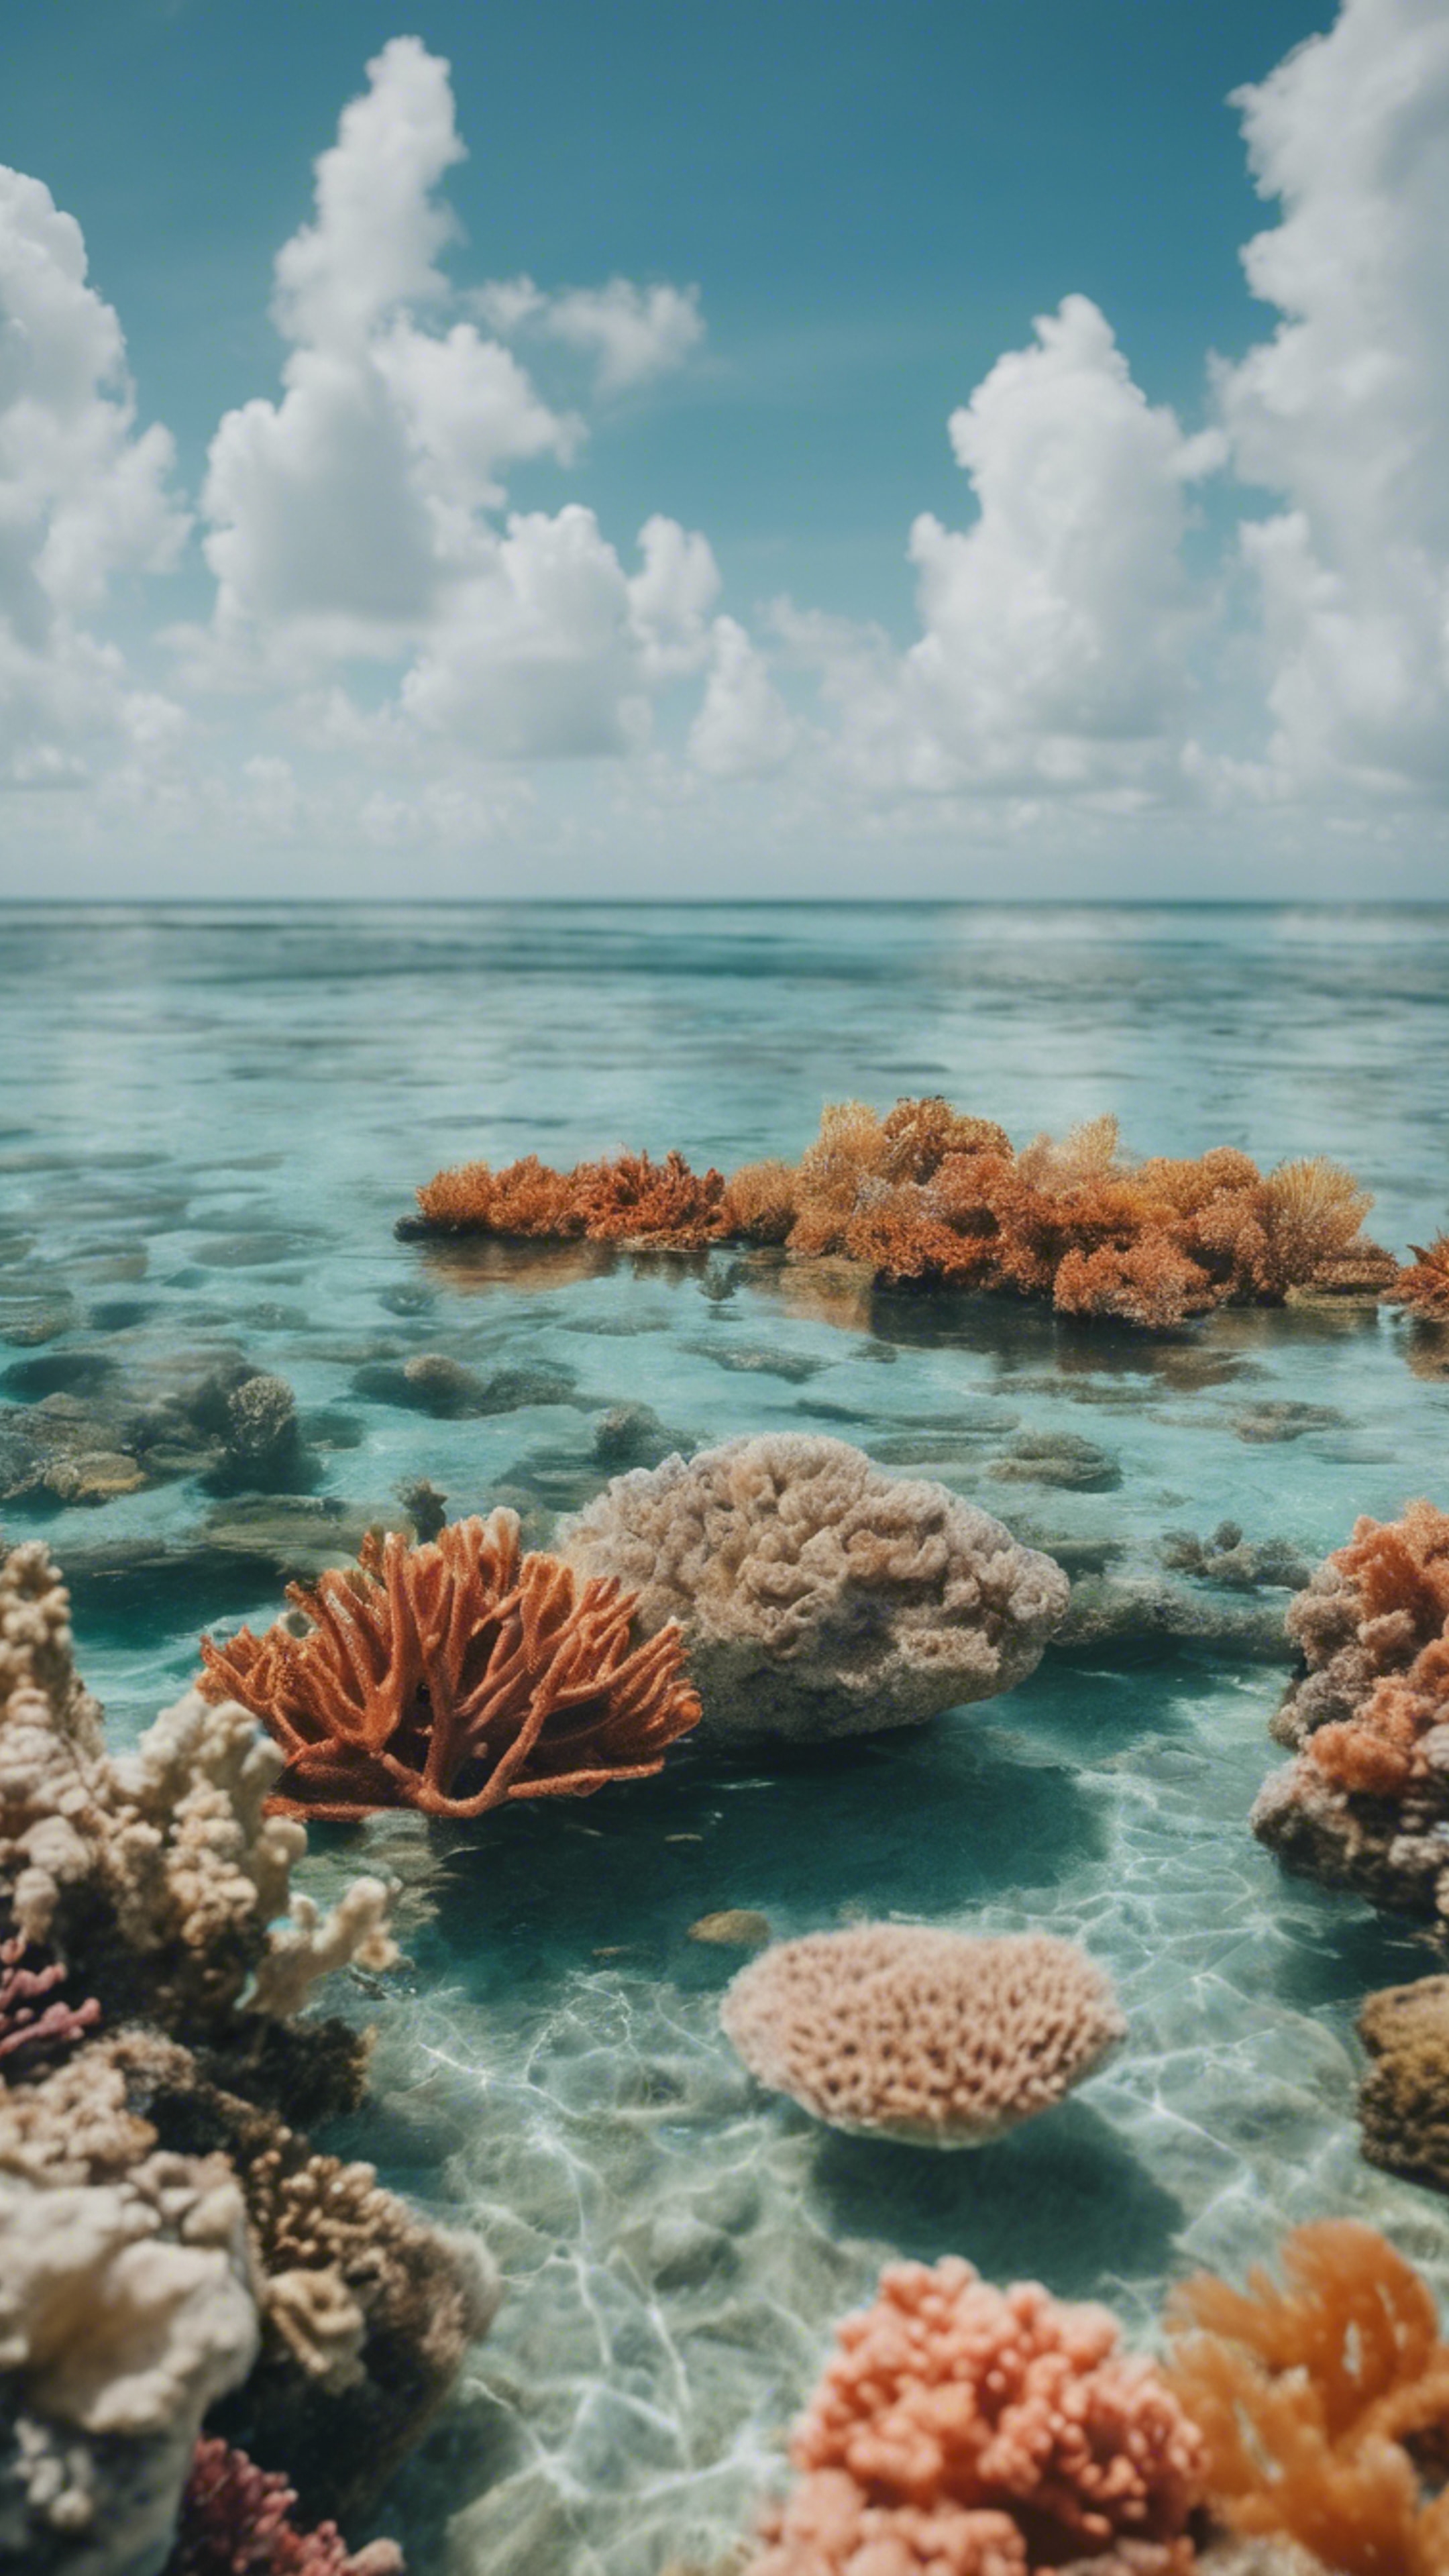 A serene view of the Florida Keys with crystal clear water and a colorful coral reef visible underwater. Taustakuva[53a9c37260d942df83c4]